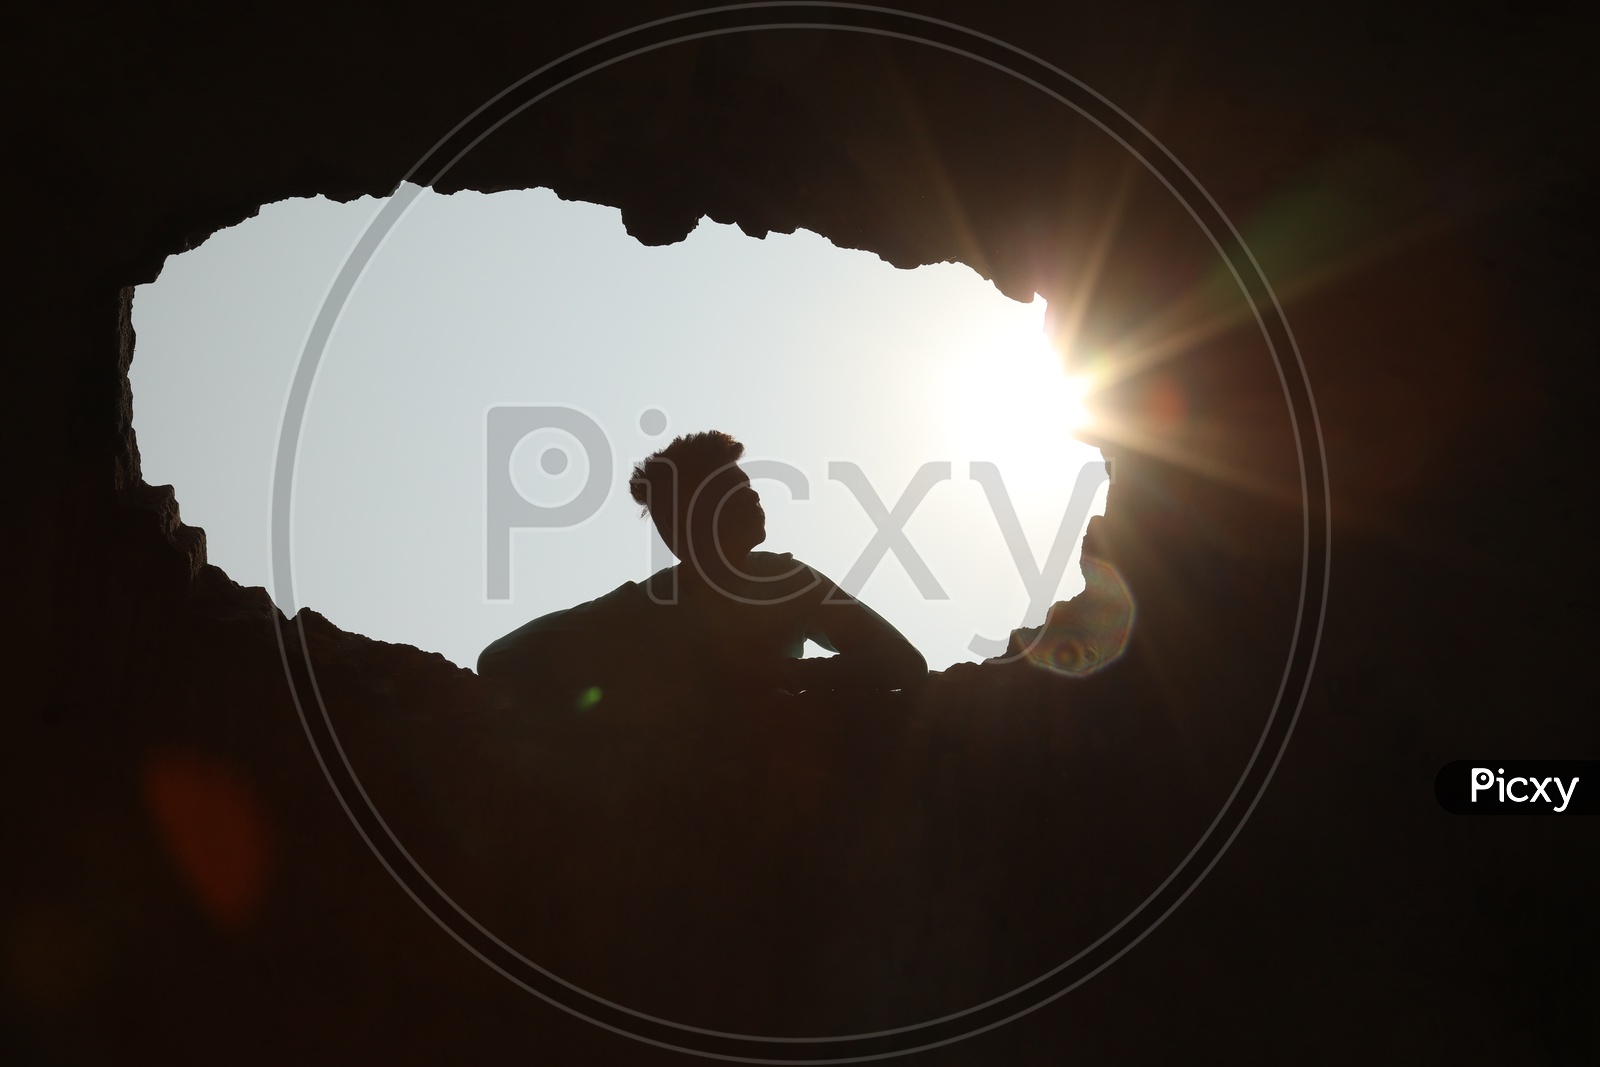 Silhouette Of a Young Boy Over Bright Sun